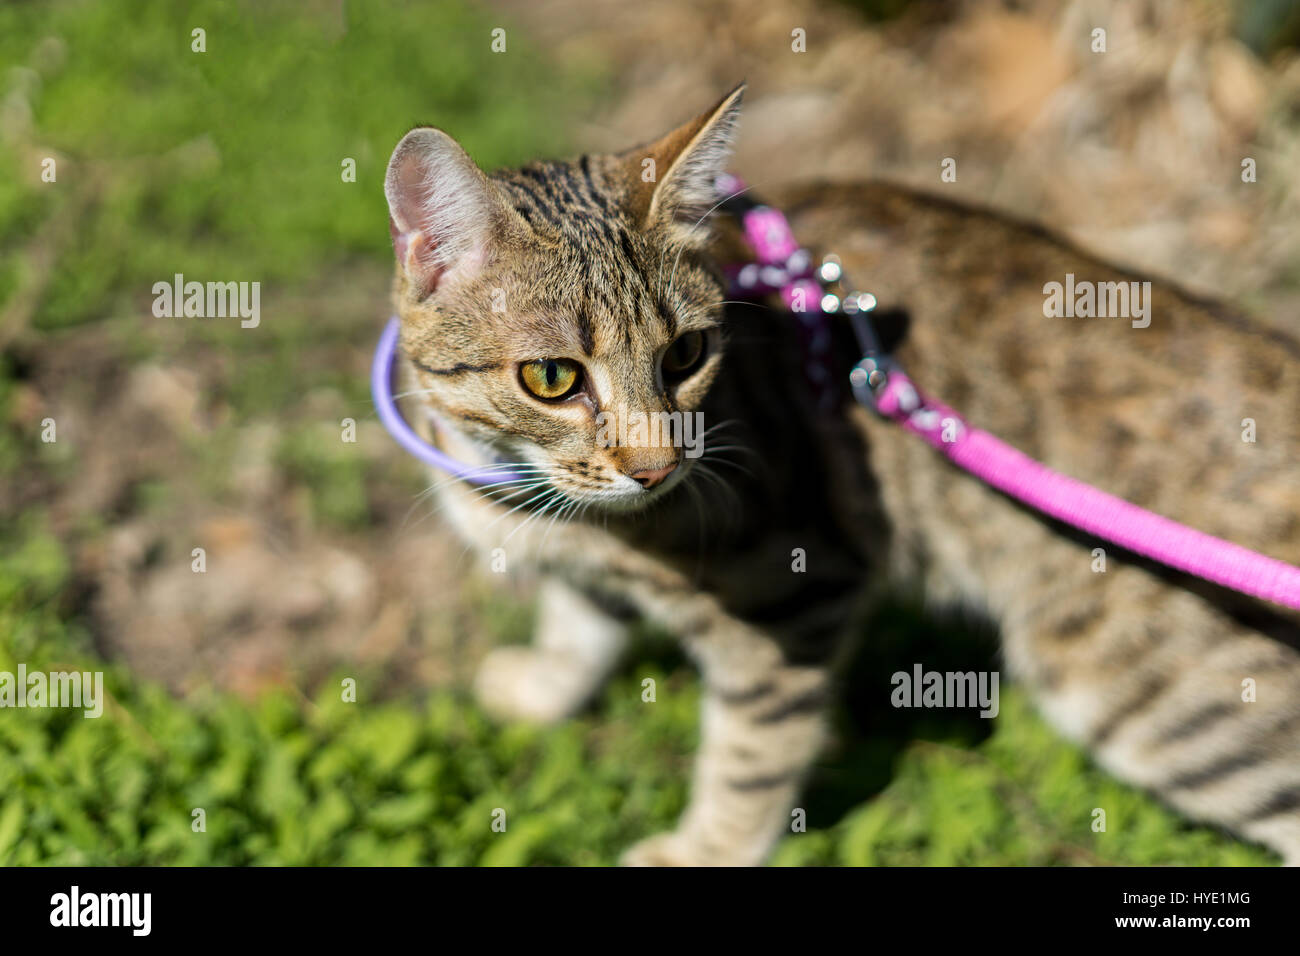 First going out. Kitten on a leash outdoor. Cat hunting in natural surroundings Stock Photo